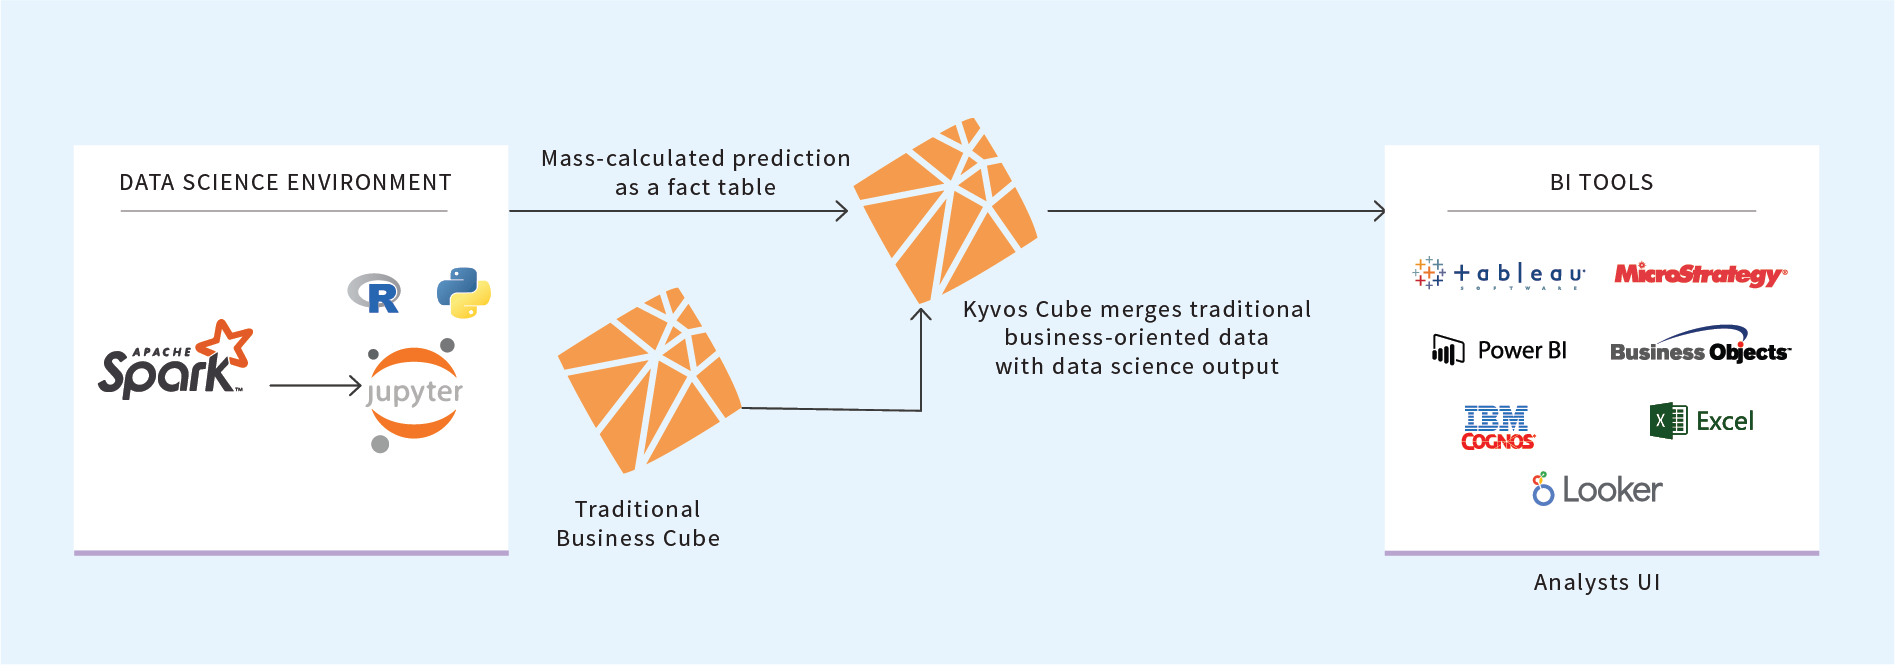 Integrate business cube data with materialized model outputs